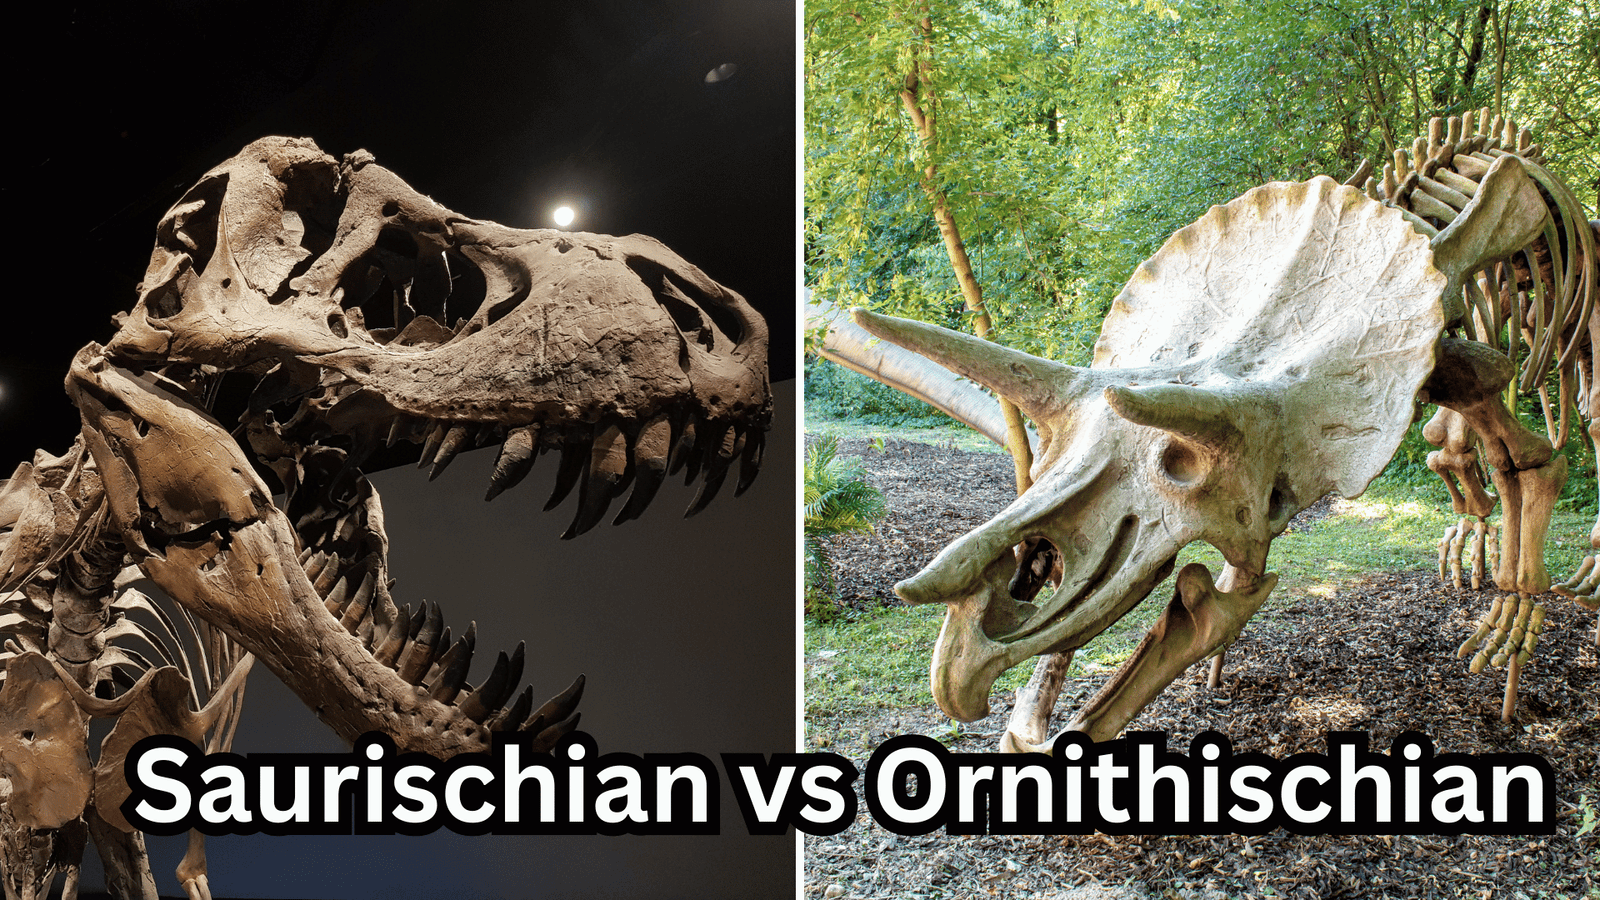 Saurischian-vs-Ornithischian - whats the difference?